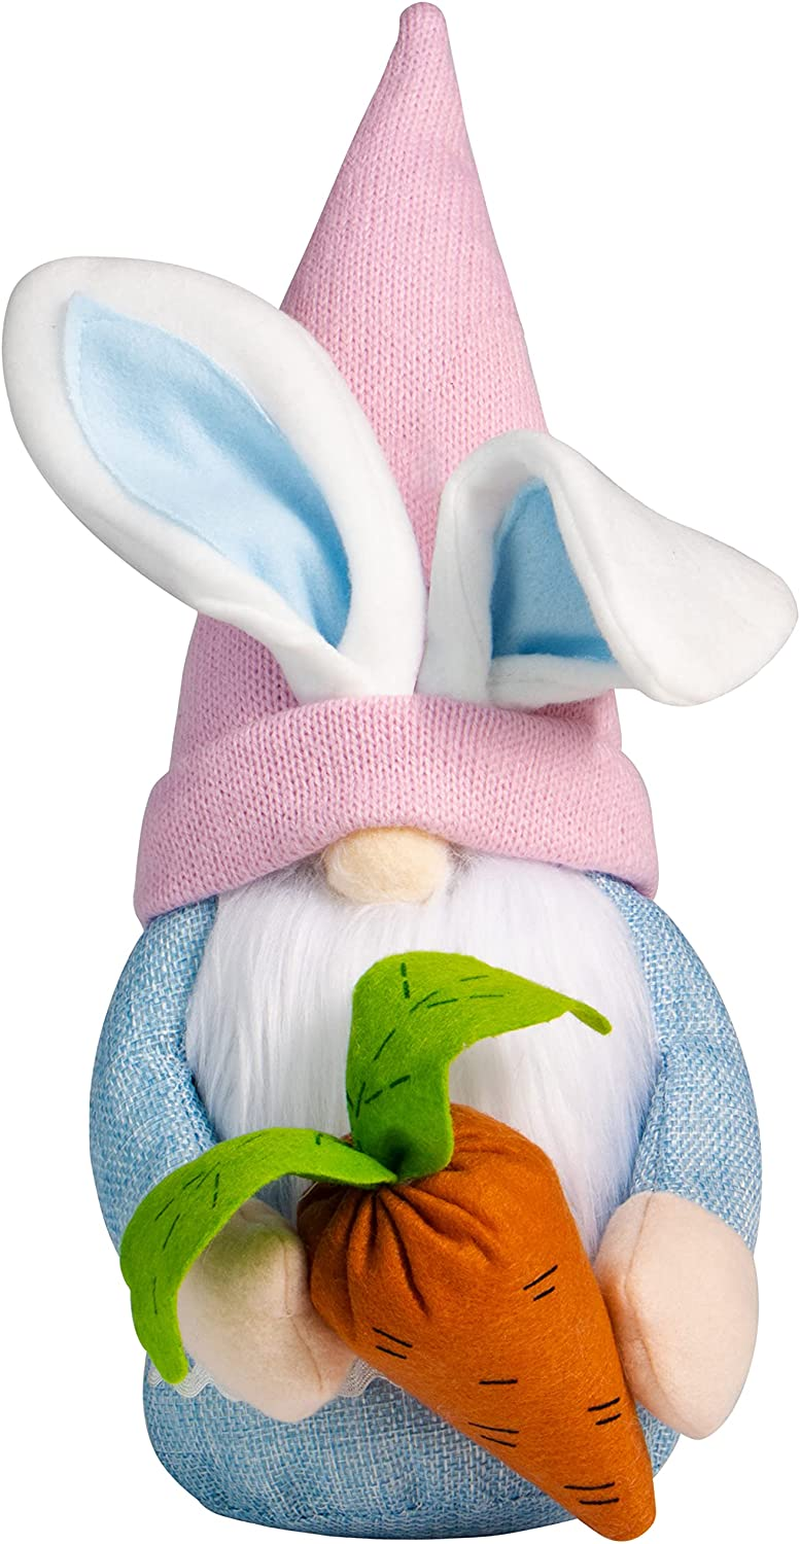 JOYIN 2 Pcs Easter Decorations Gnome Faceless Plush Doll for Easter Theme Party Favor, Easter Eggs Hunt, Basket Stuffers Filler, Classroom Prize Supplies